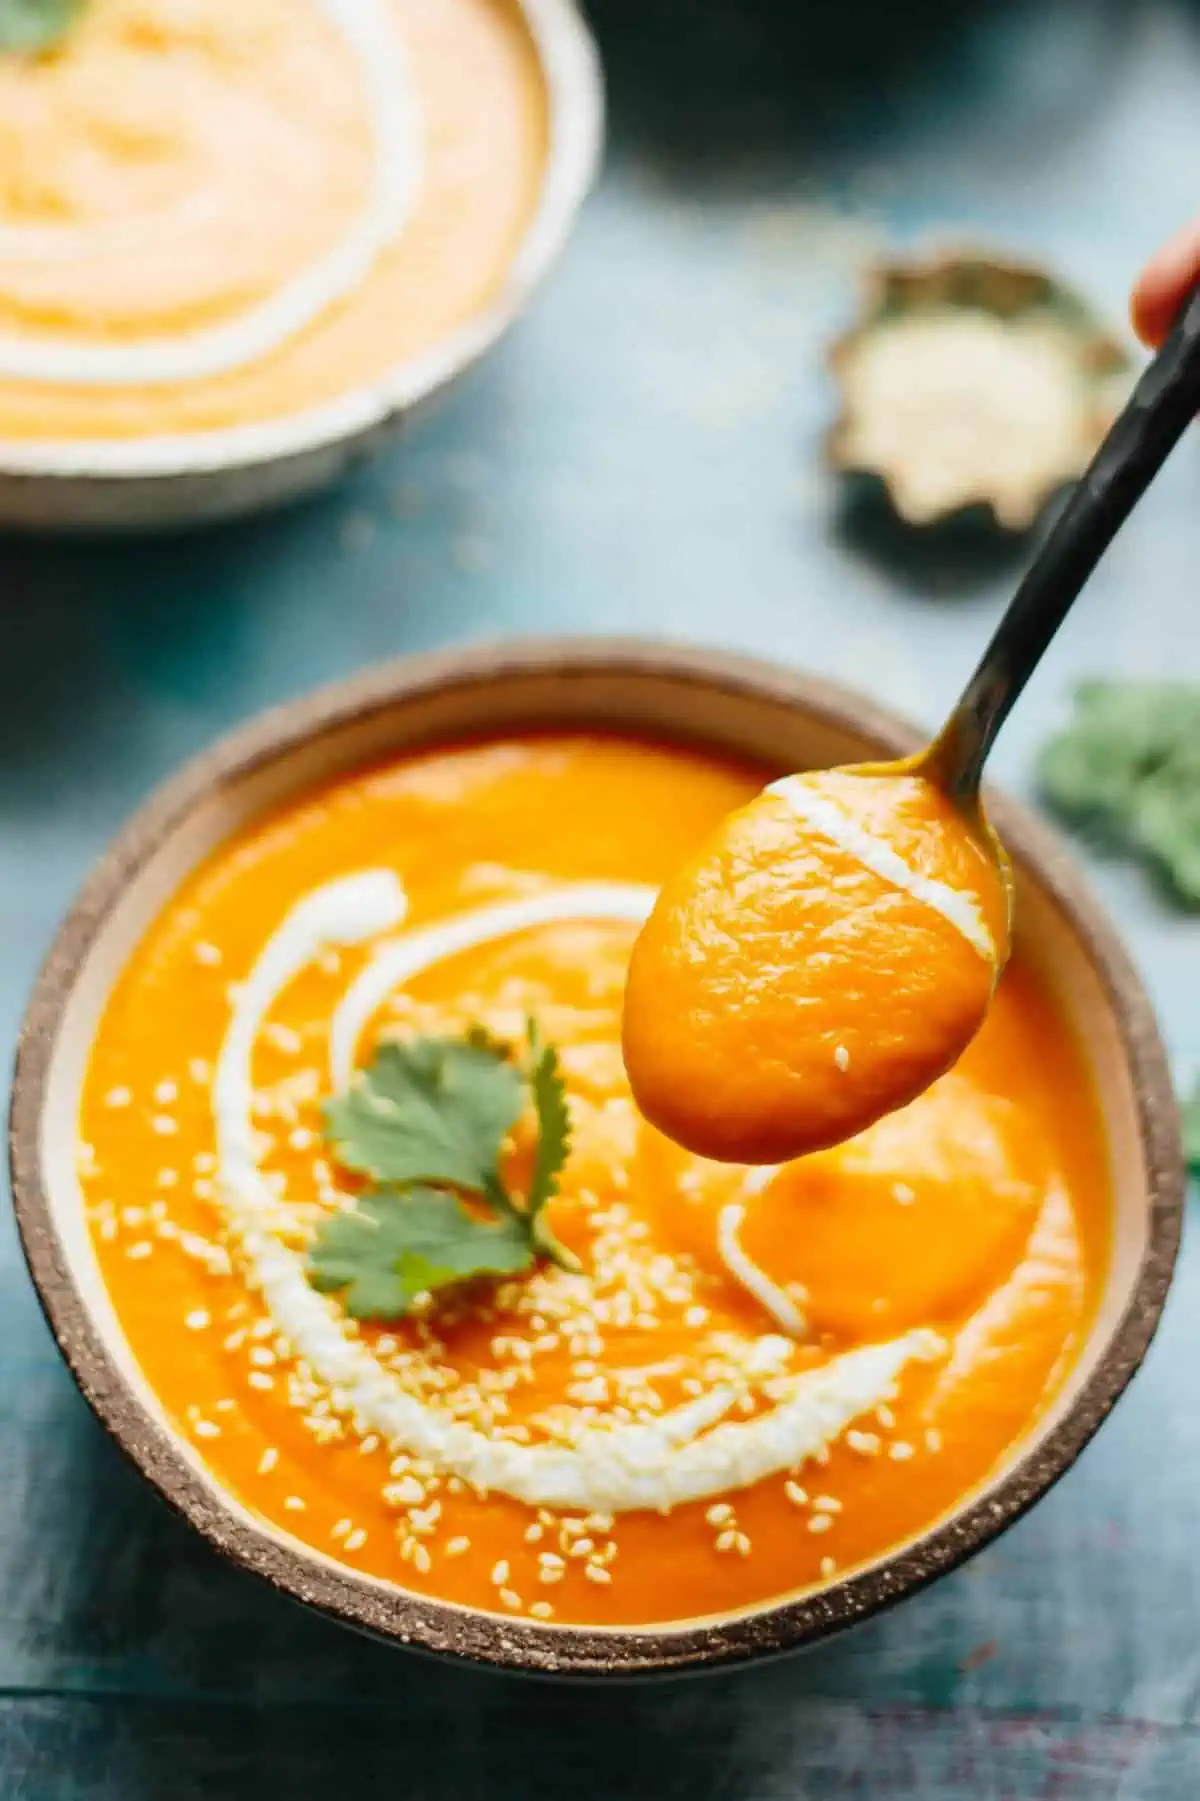 A spoon that has dipped into a bowl of spicy carrot soup.